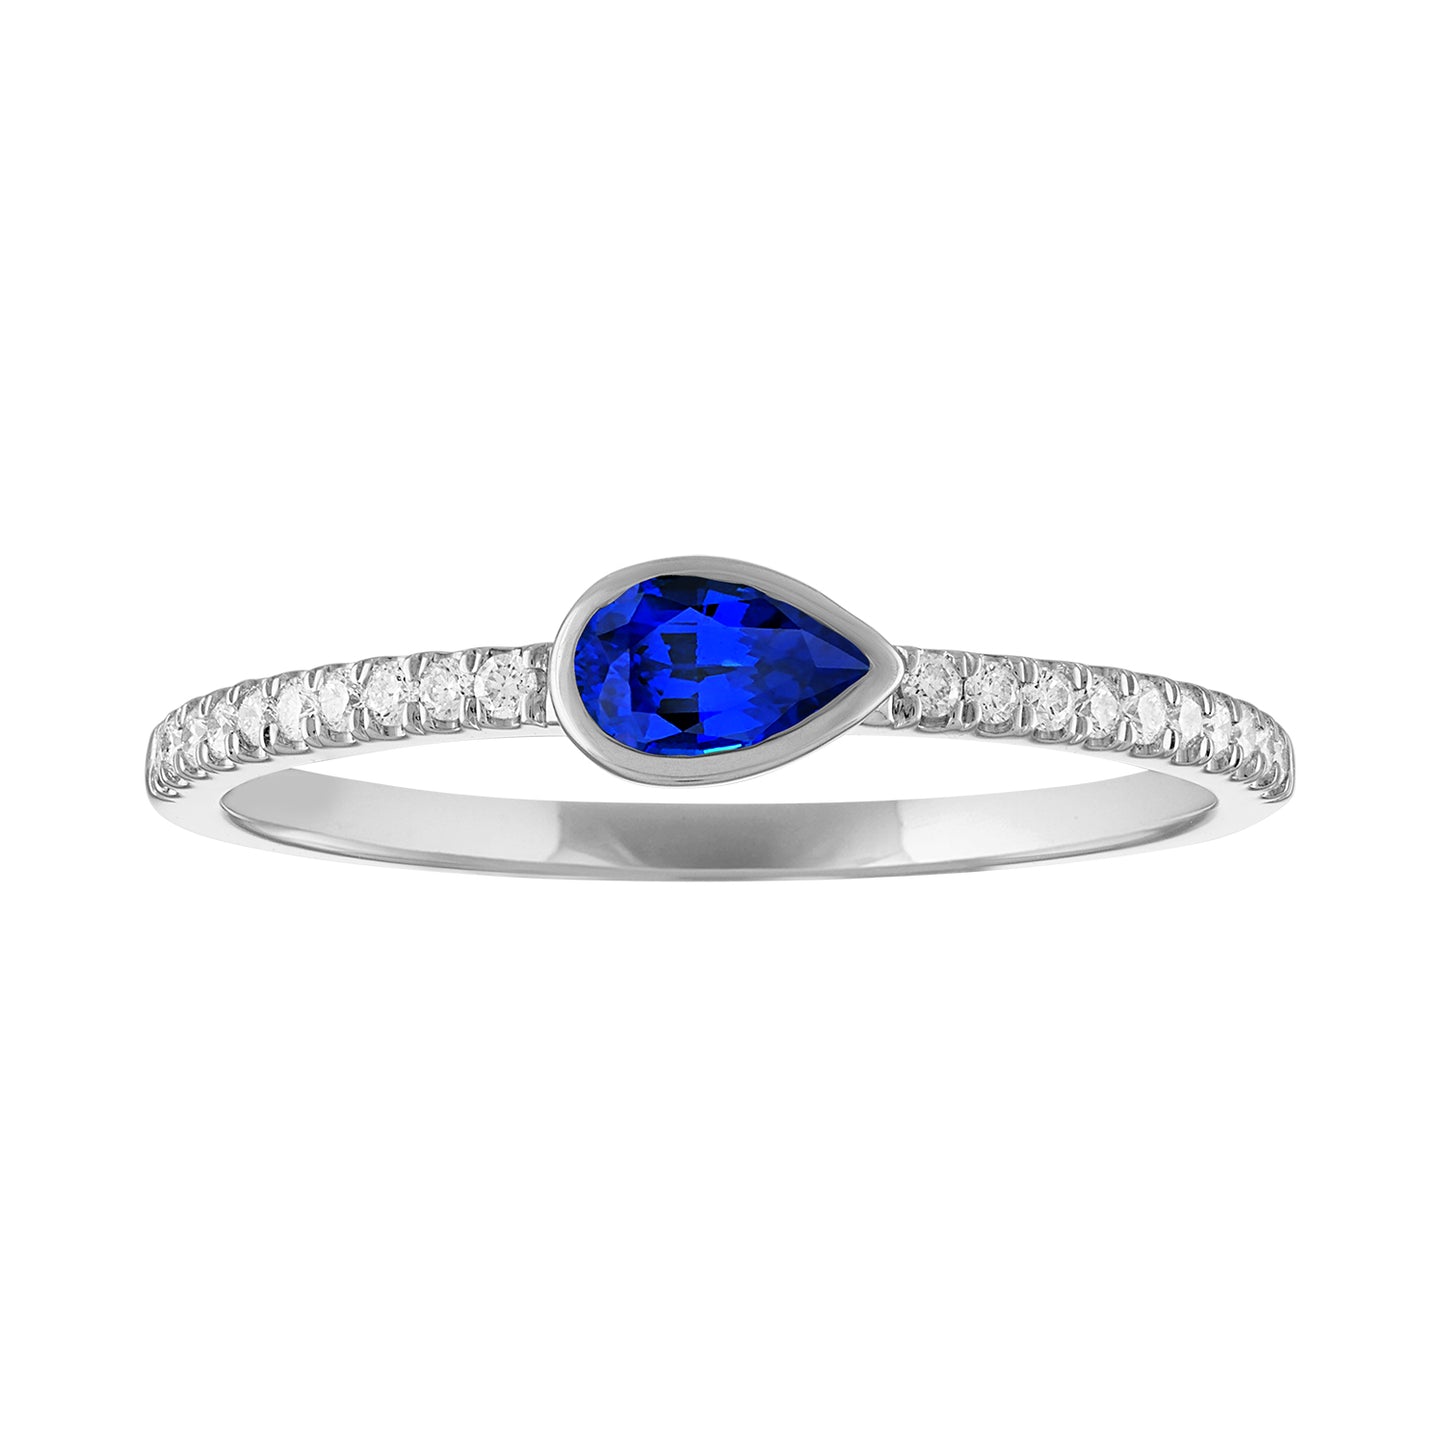 White gold skinny band with a bezeled pear shape sapphire in the center and round diamonds on the shank. 